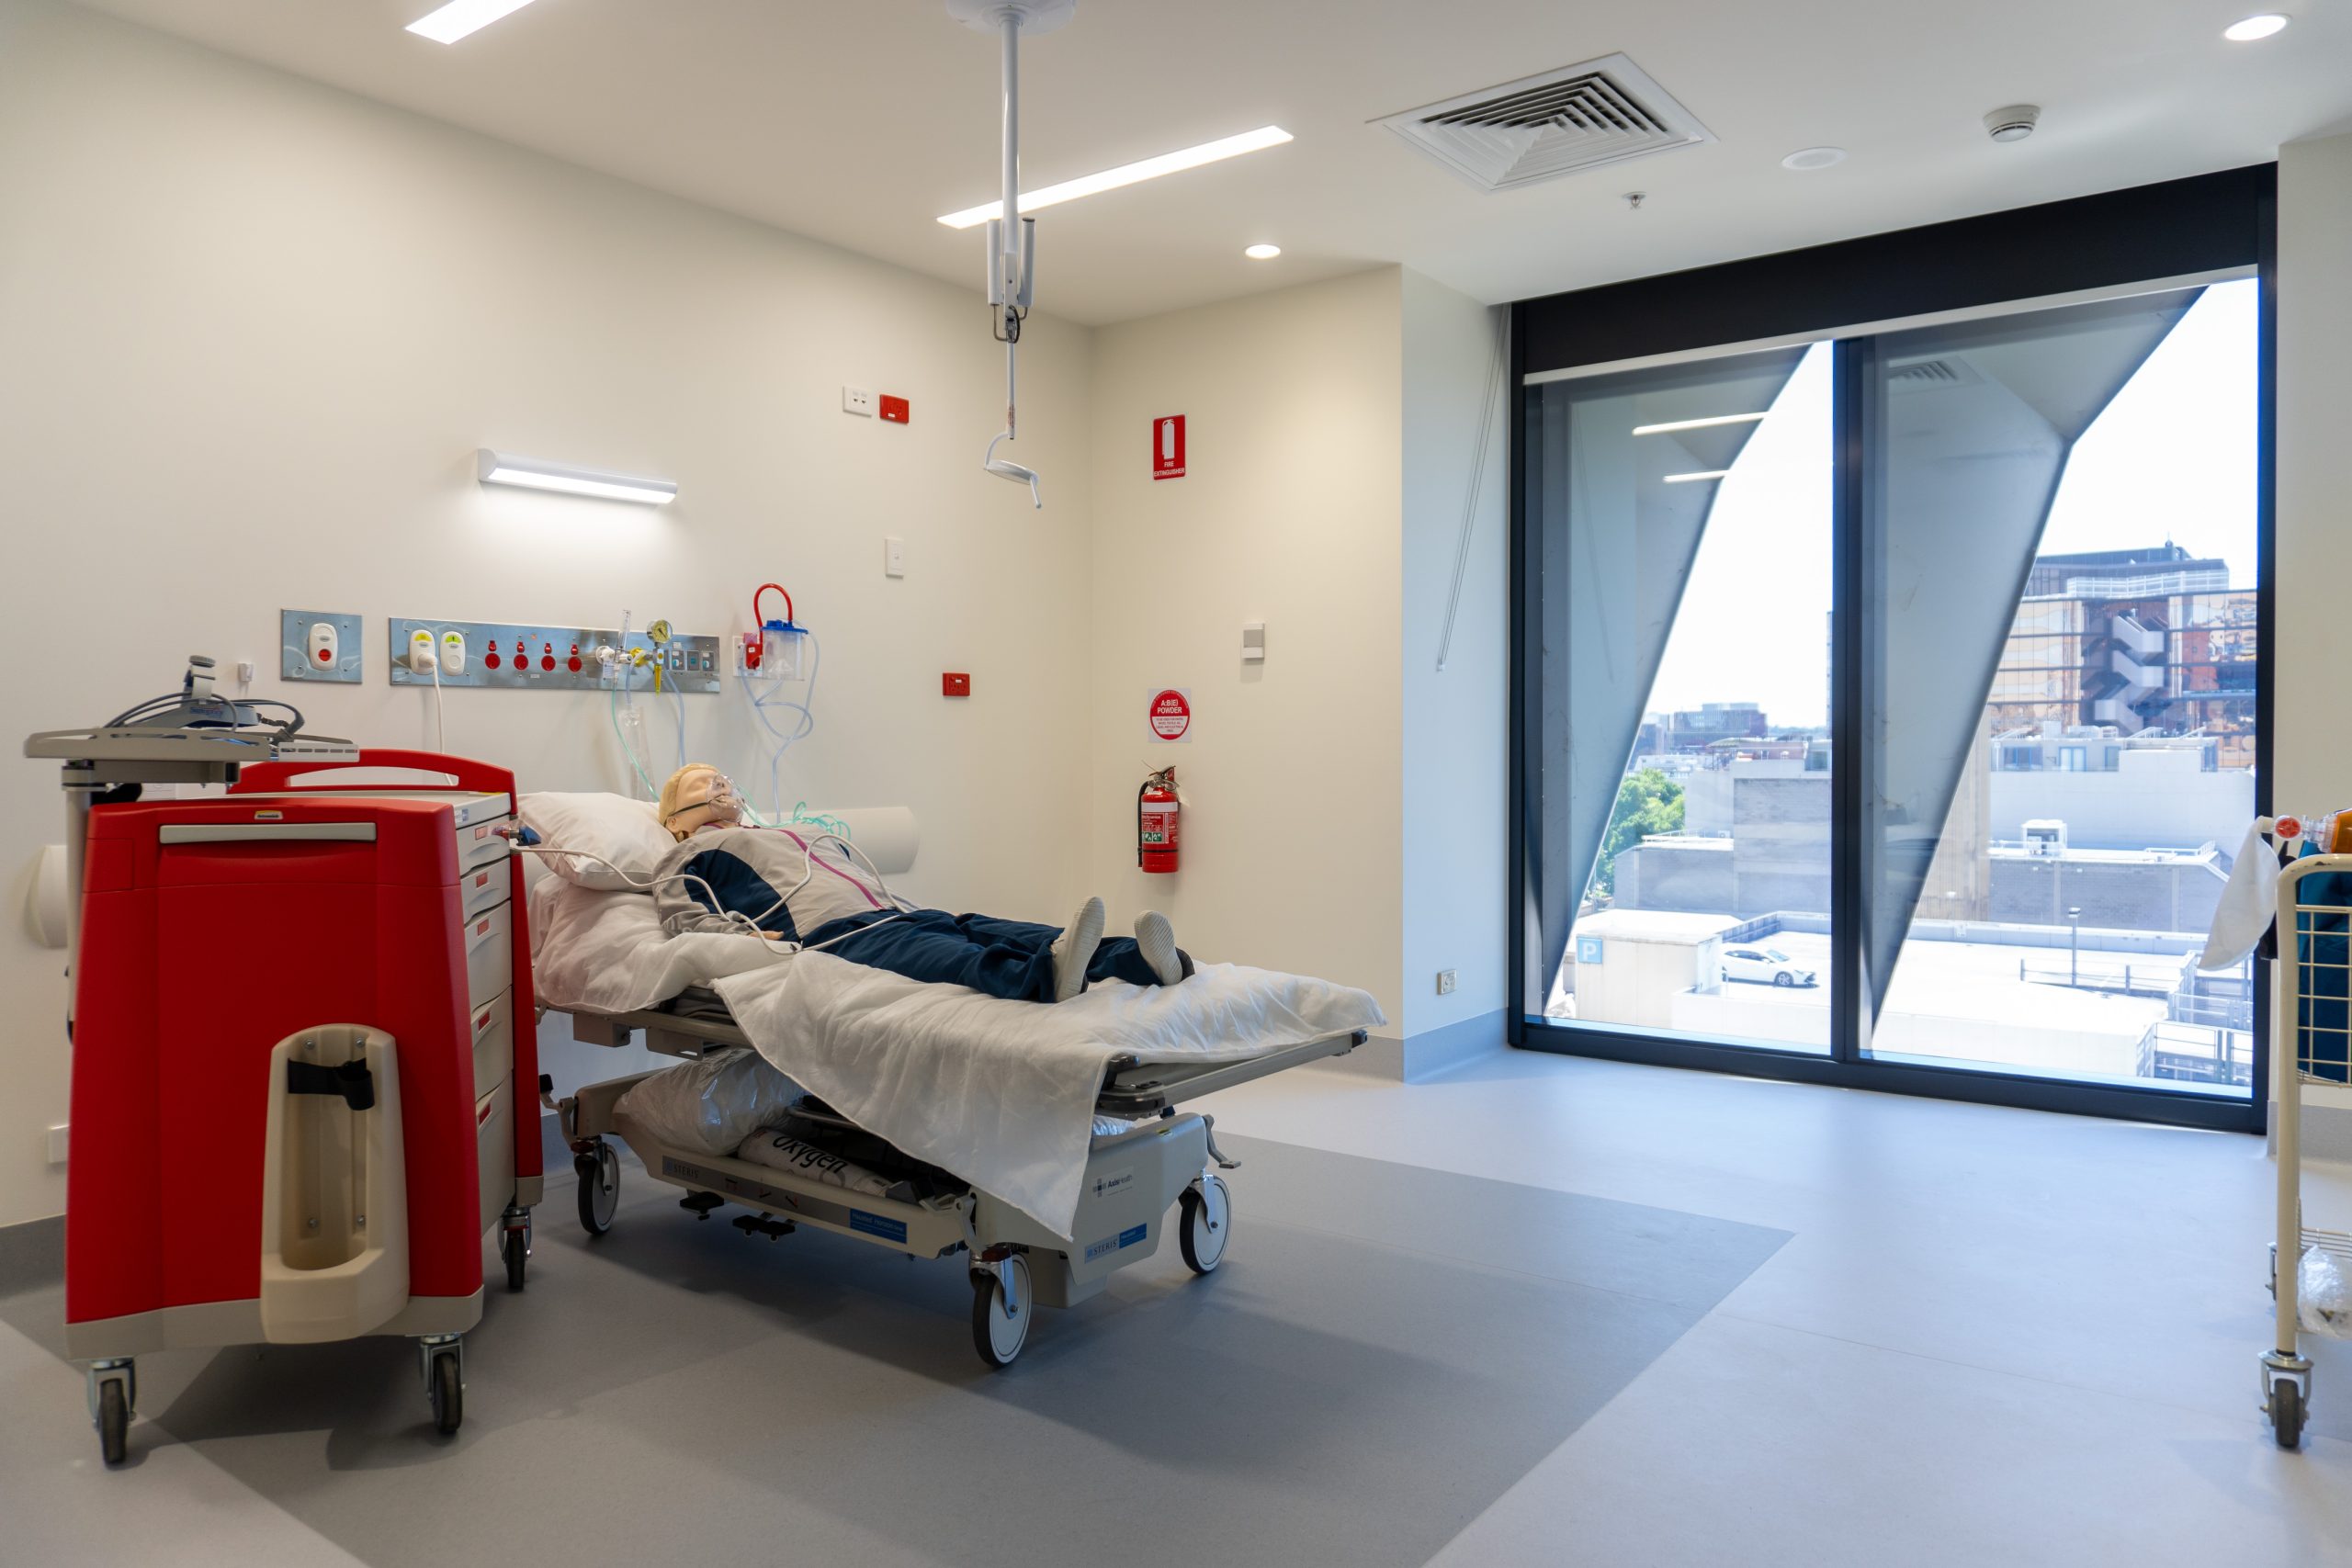 The clinical simulation room equipped with hospital bed, Patient dummy, clinical settings and nurse trolley